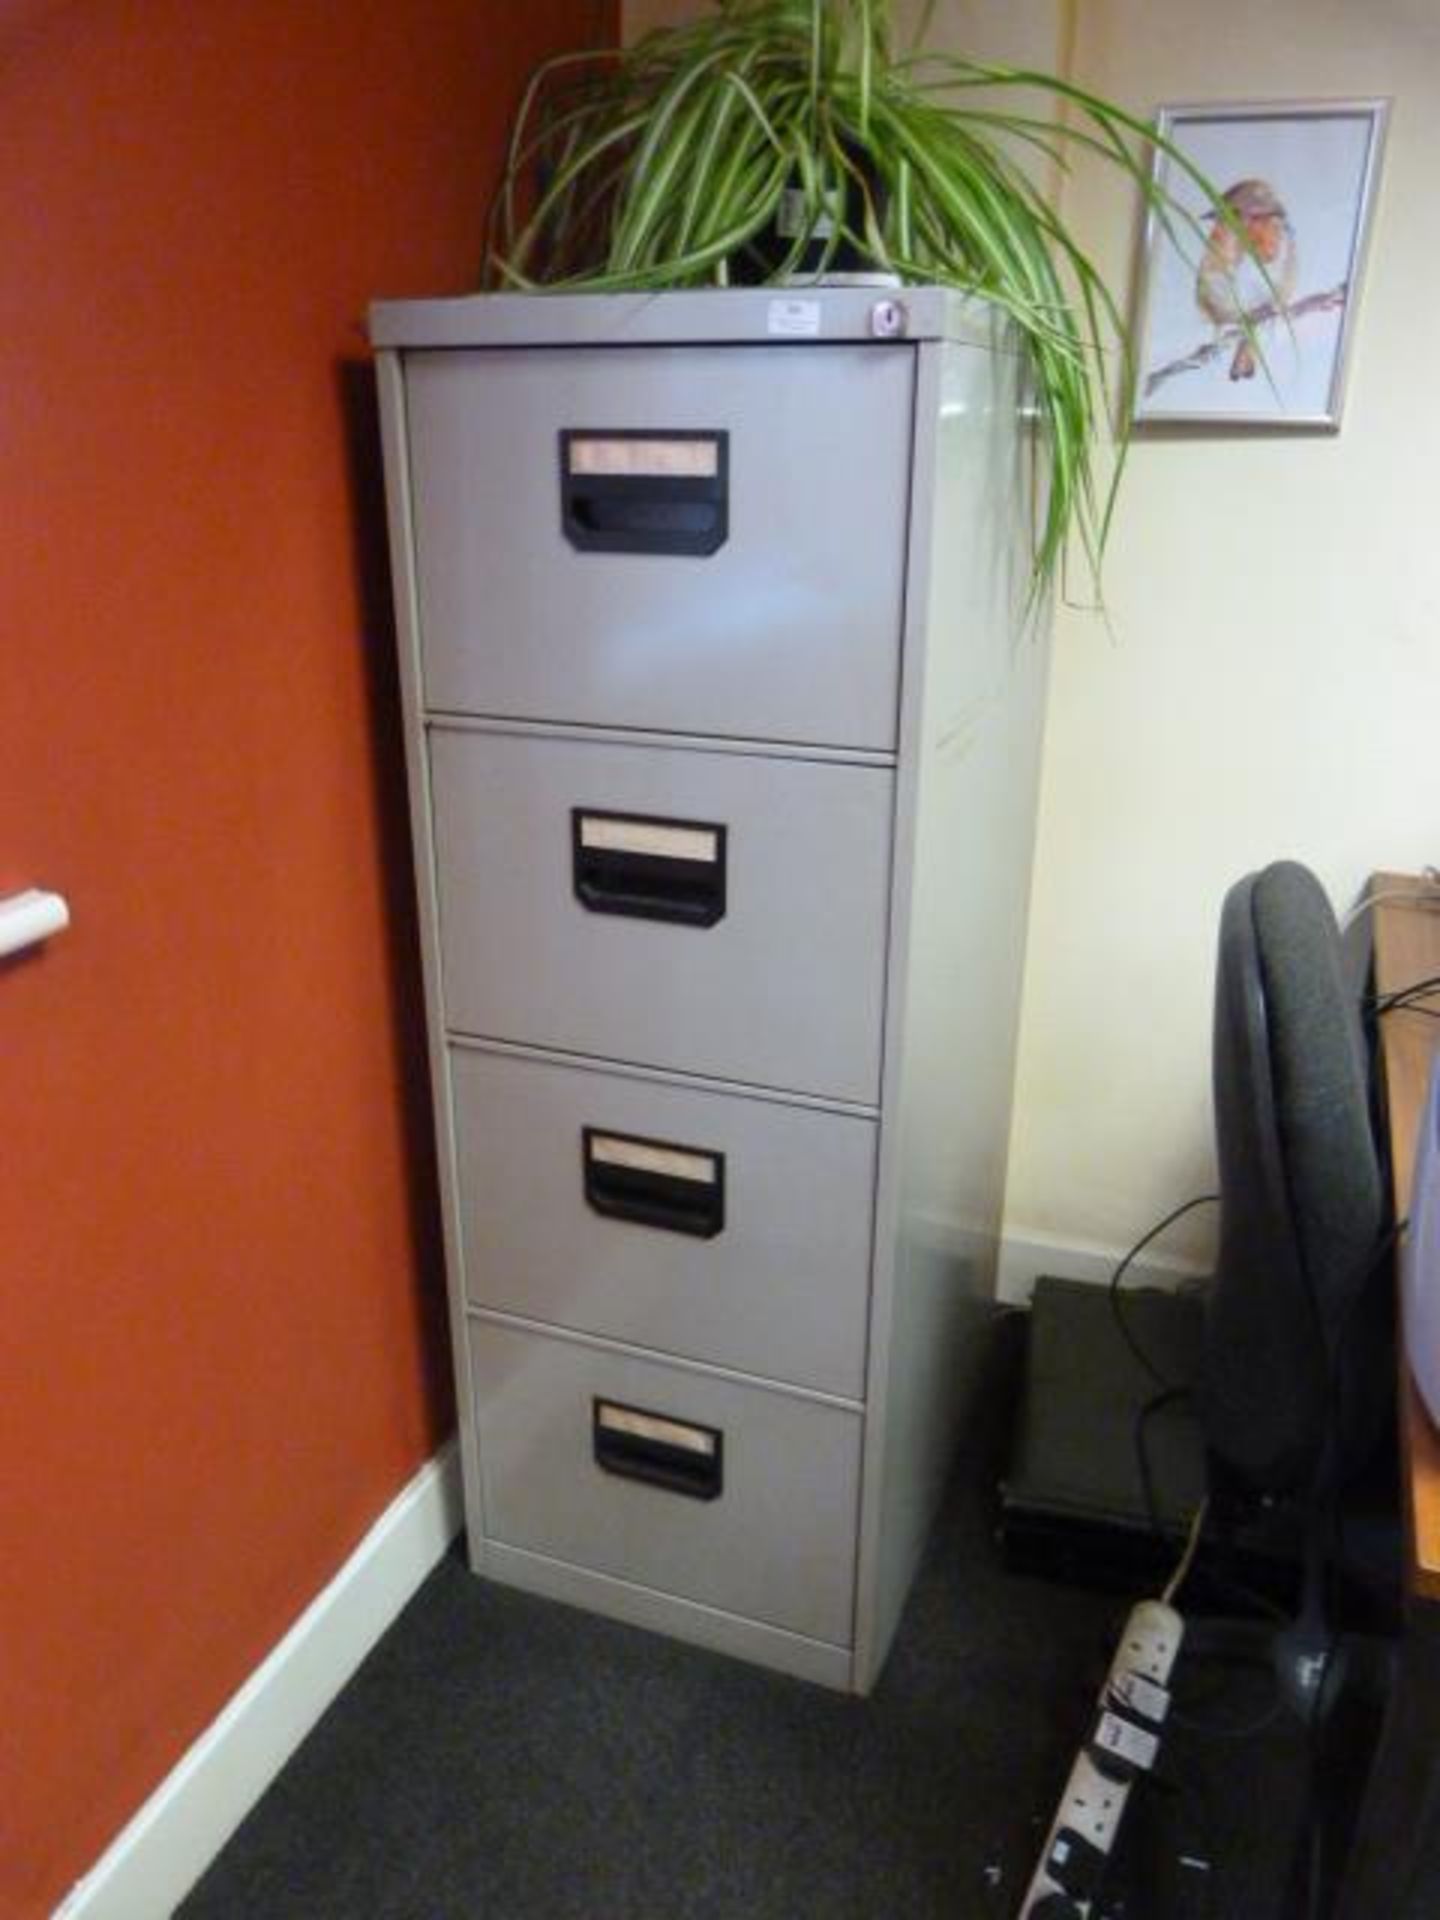 *Four Drawer Foolscap Filing Cabinet